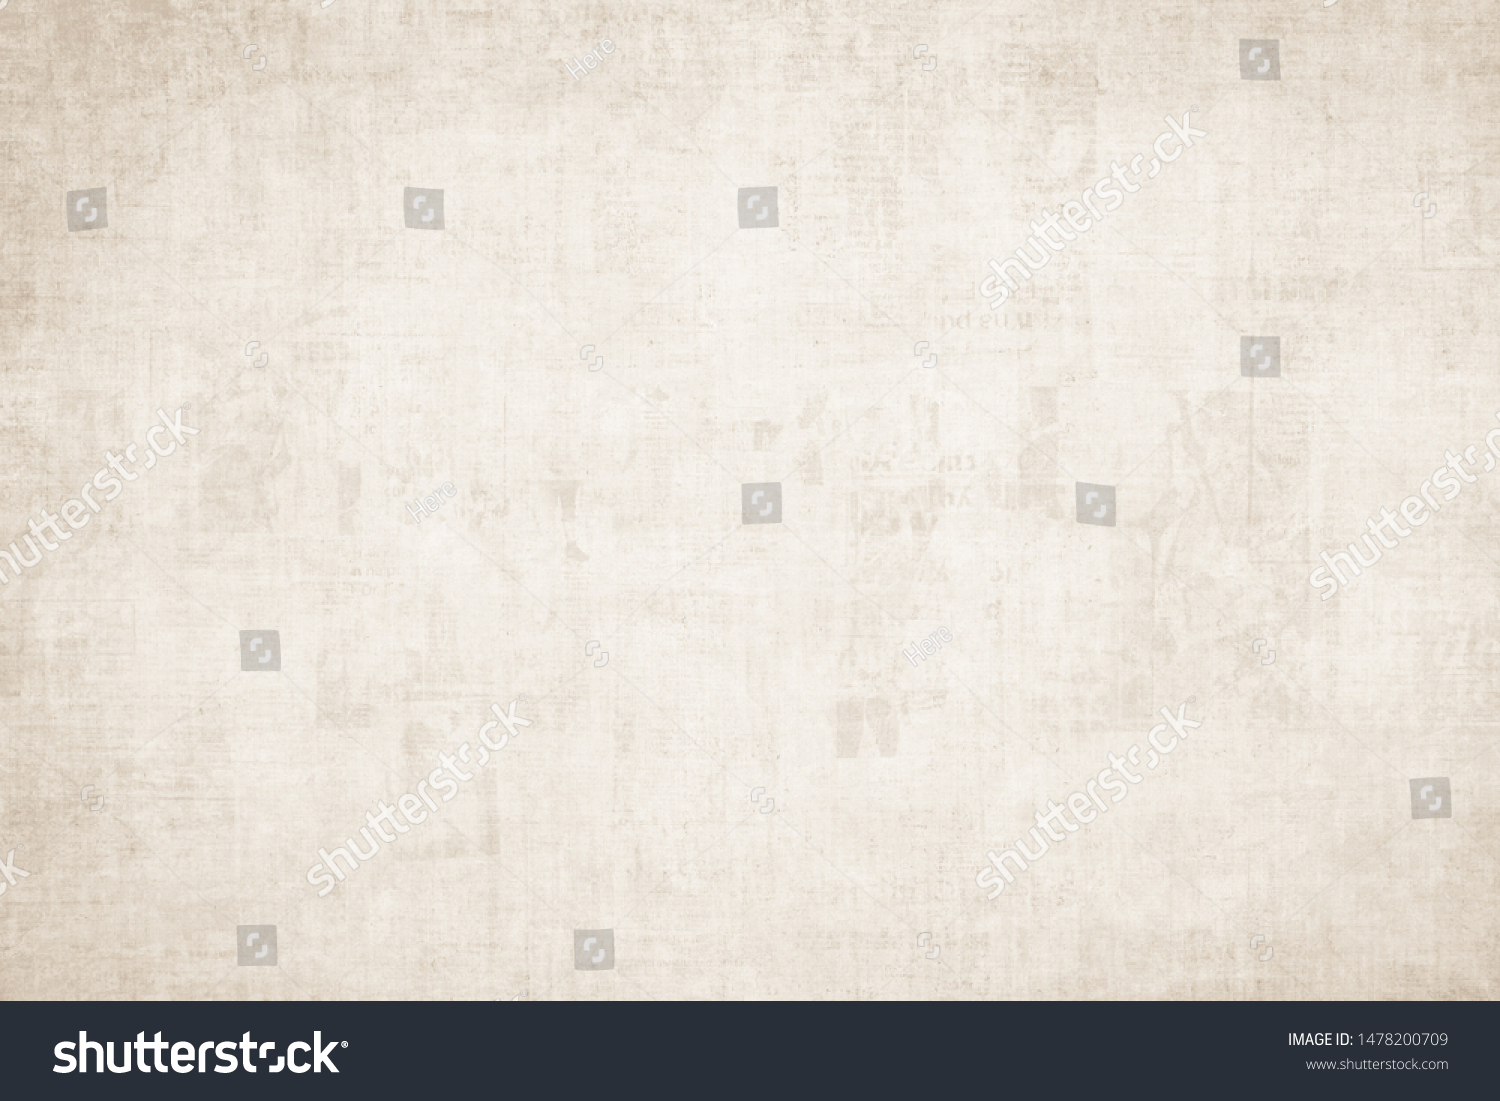 OLD NEWSPAPER BACKGROUND, GRUNGE PAPER TEXTURE, SPACE FOR TEXT #1478200709